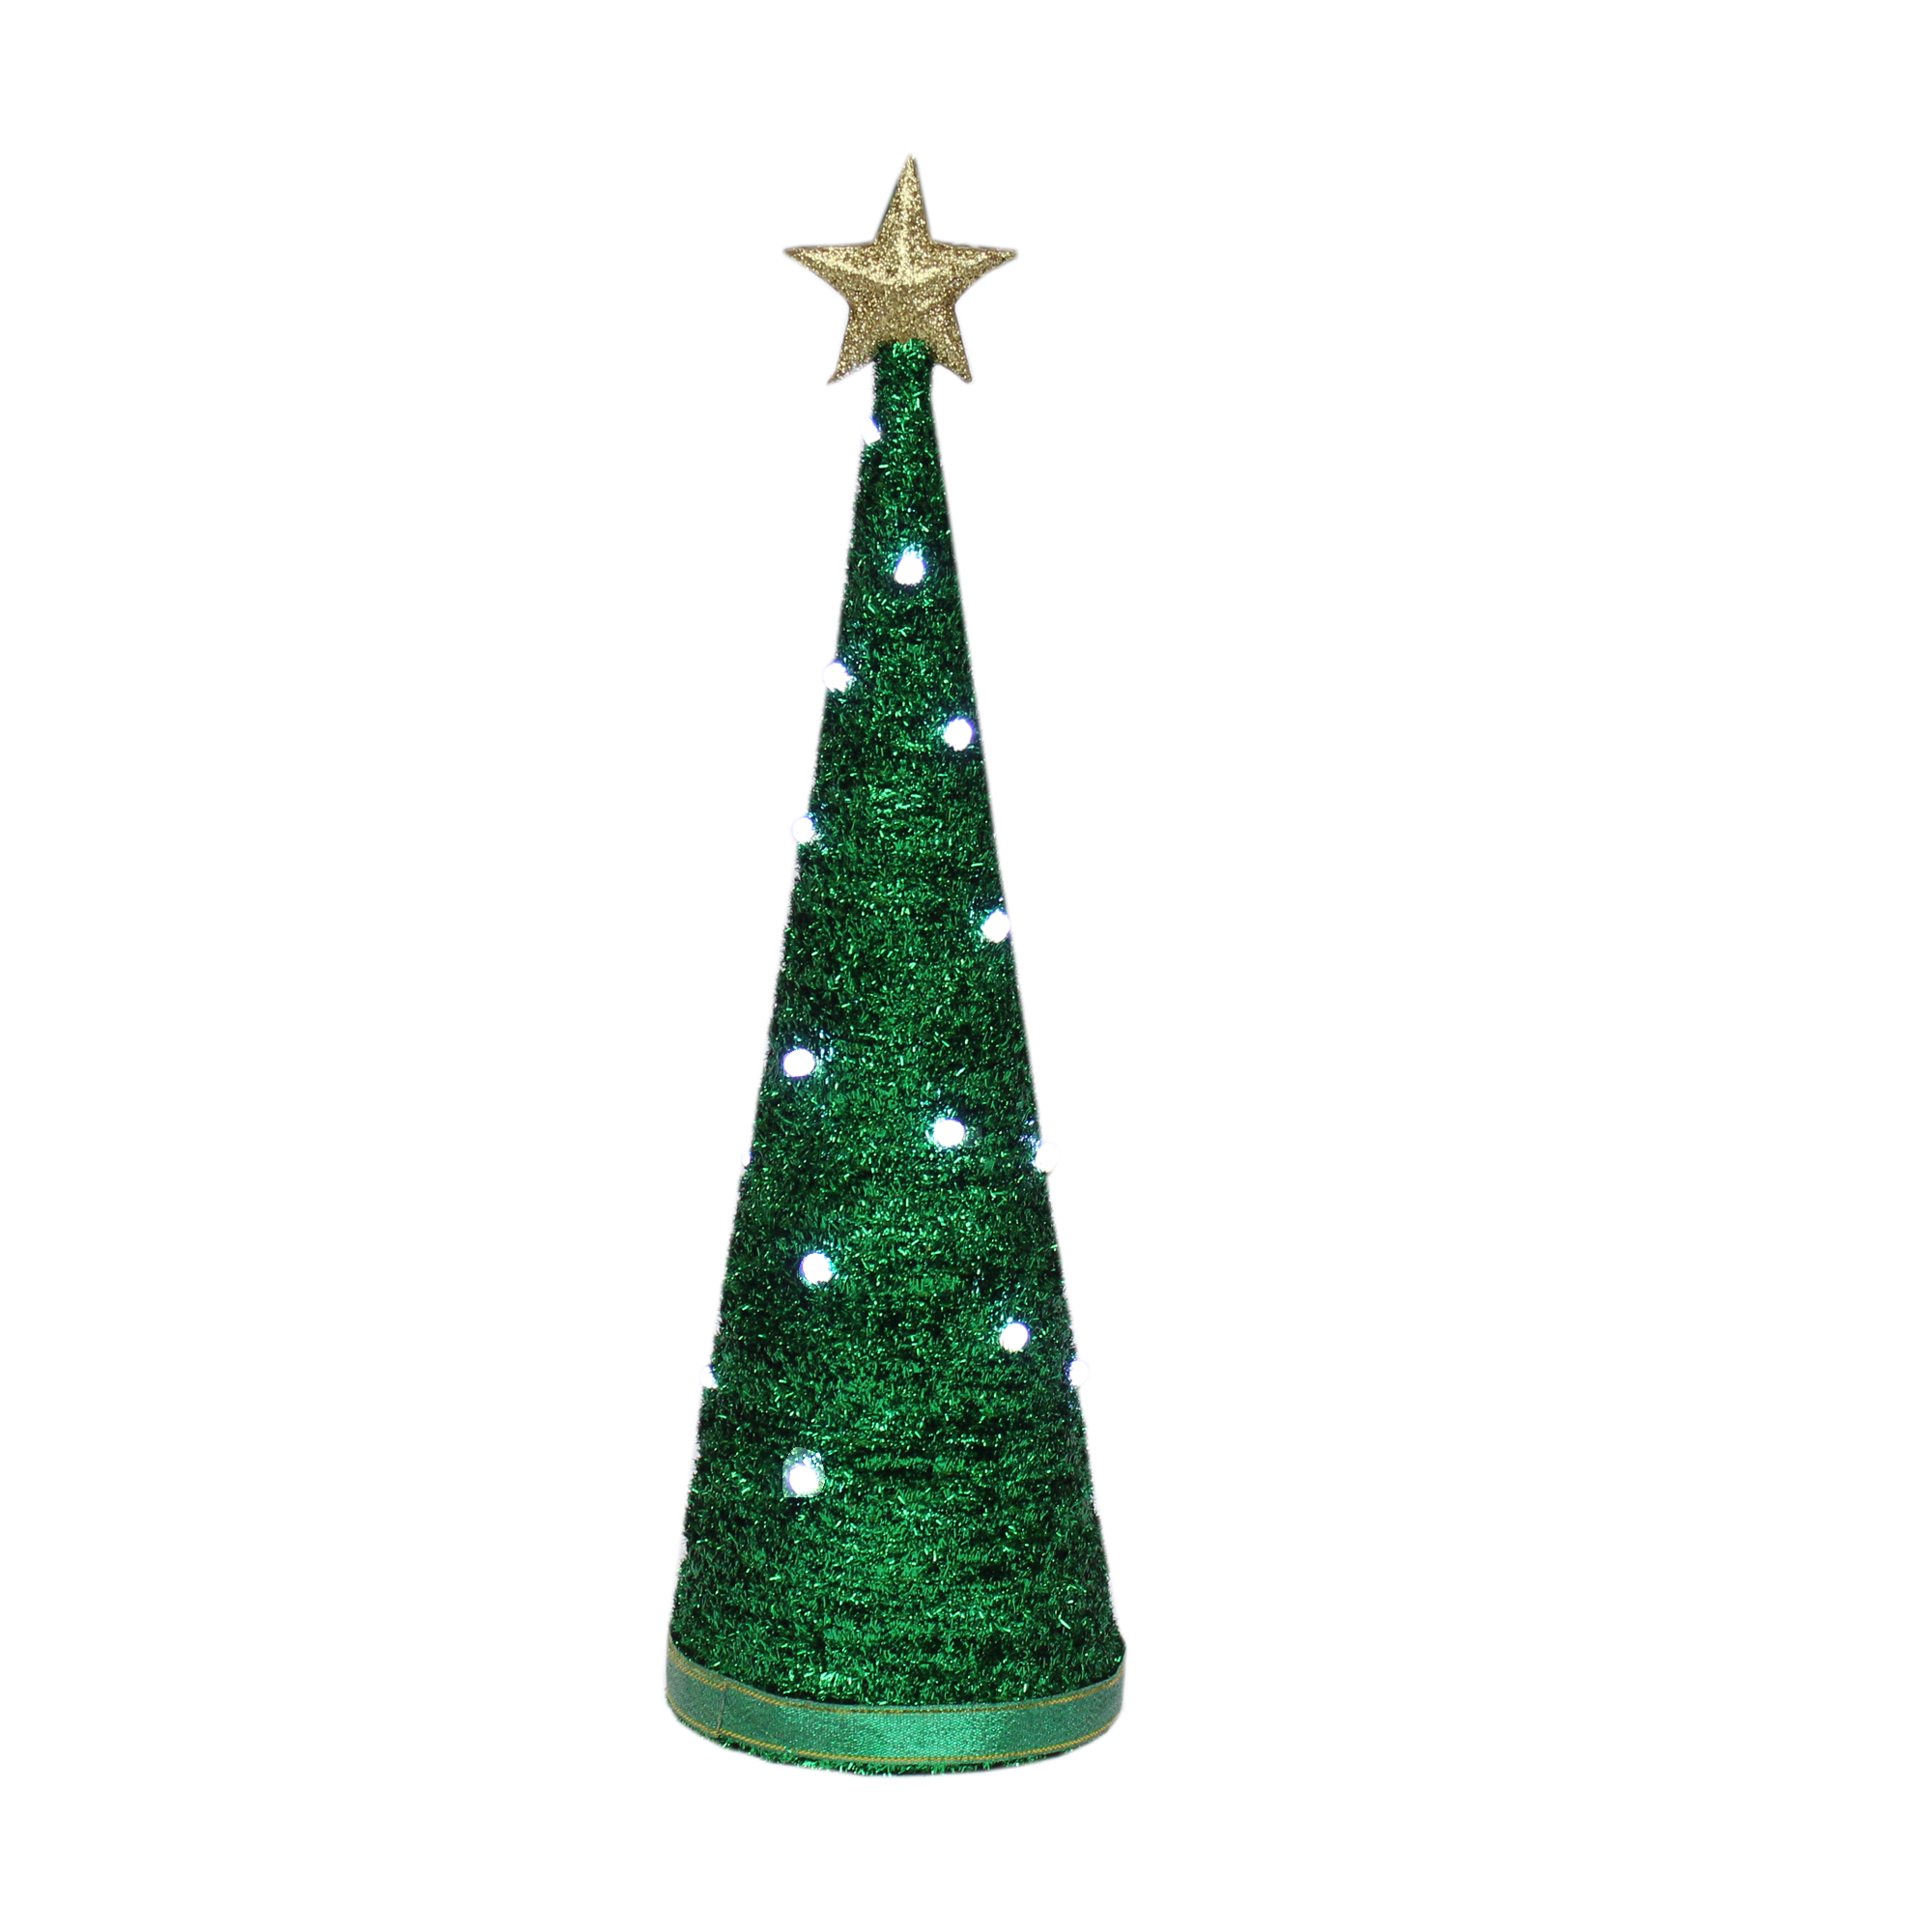 Handmade Conical Christmas Tinsel Tree with LED Light 14.5 X 4inch, Green, 1pc